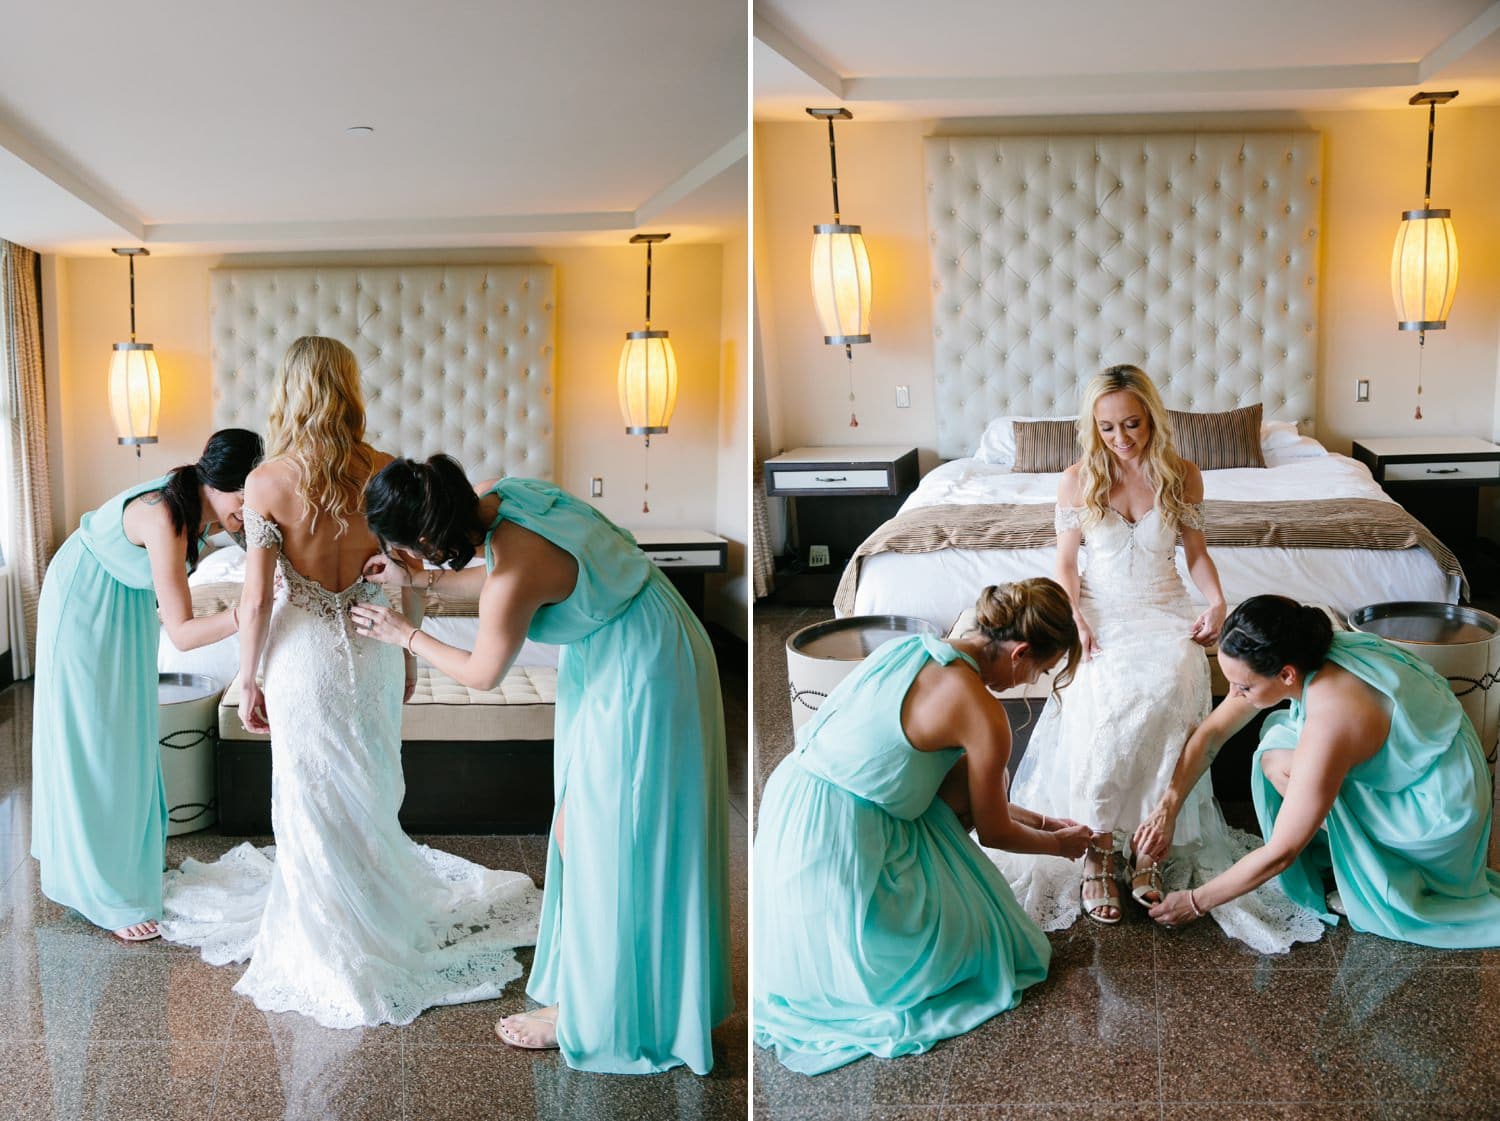 Bride getting ready. Lace Wedding Gown and turquoise bridesmaids dresses. Winter Beach Wedding at the National Hotel in South Beach Fl 